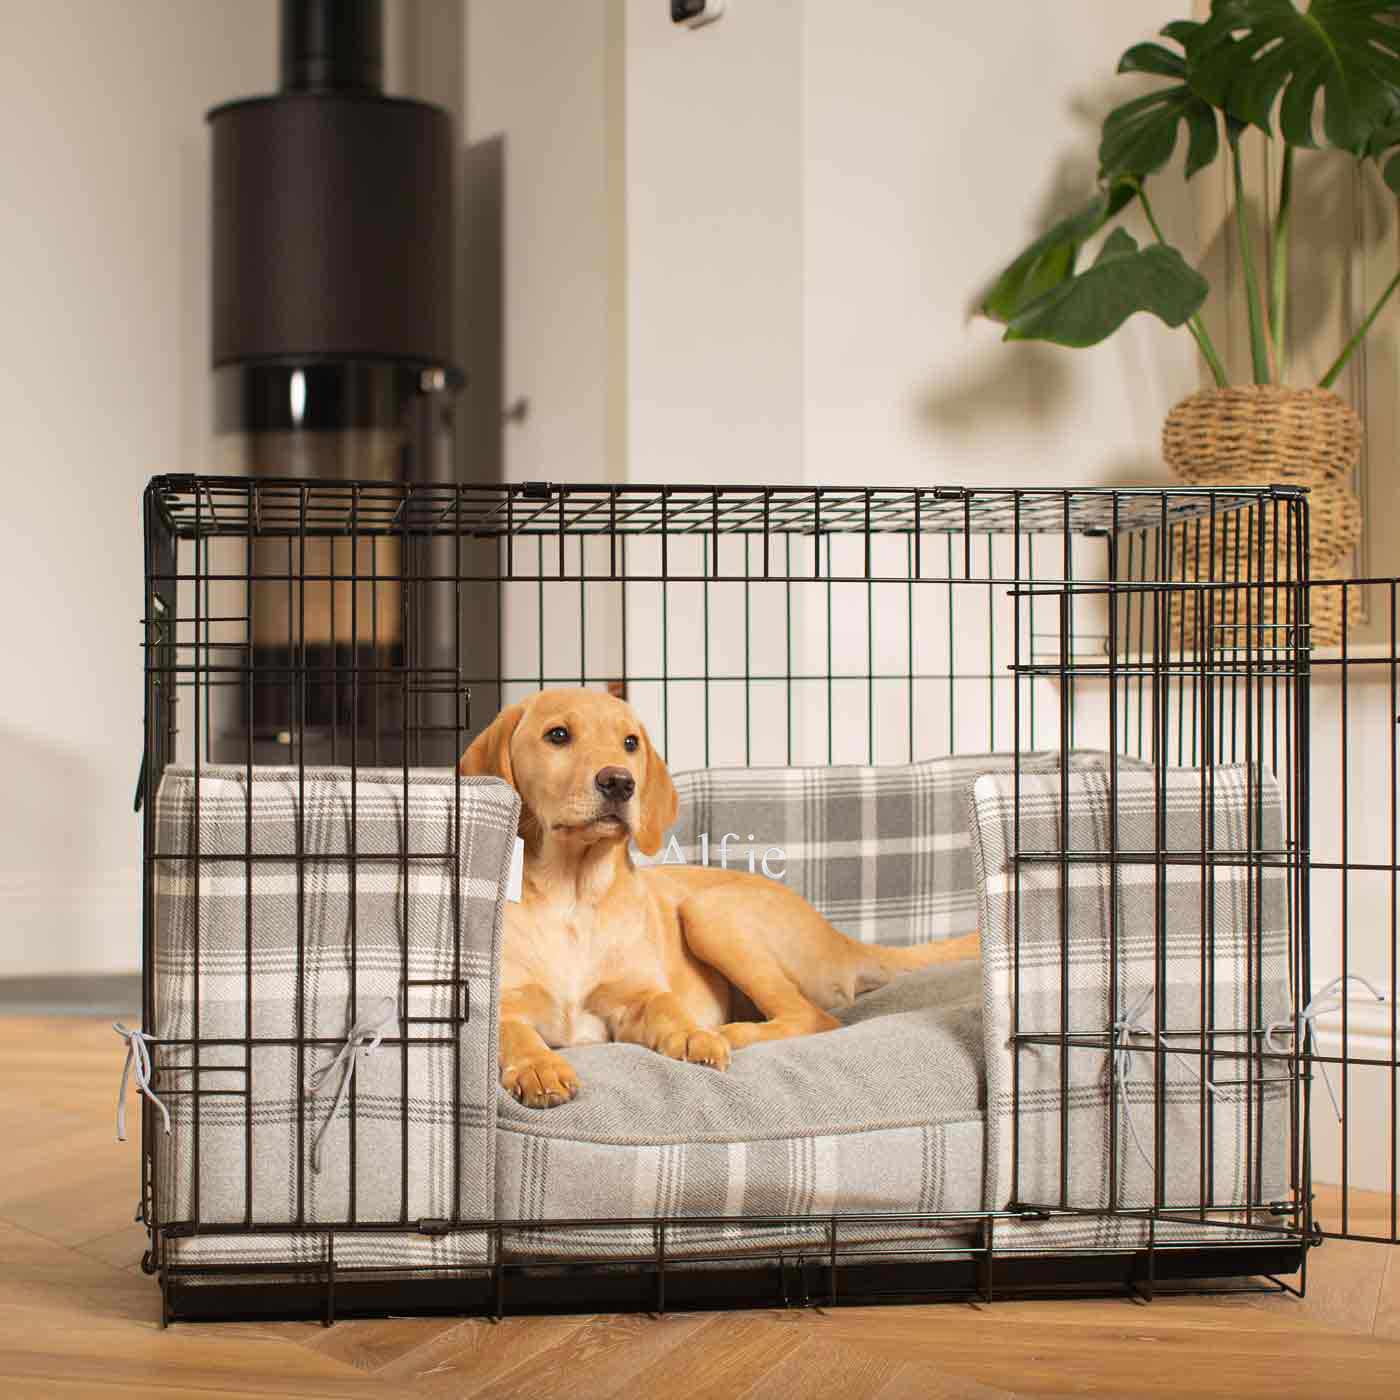  Luxury Dog Crate Bumper, Balmoral Dove Grey Tweed Crate Bumper Cover The Perfect Dog Crate Accessory, Available Now at Lords & Labradors